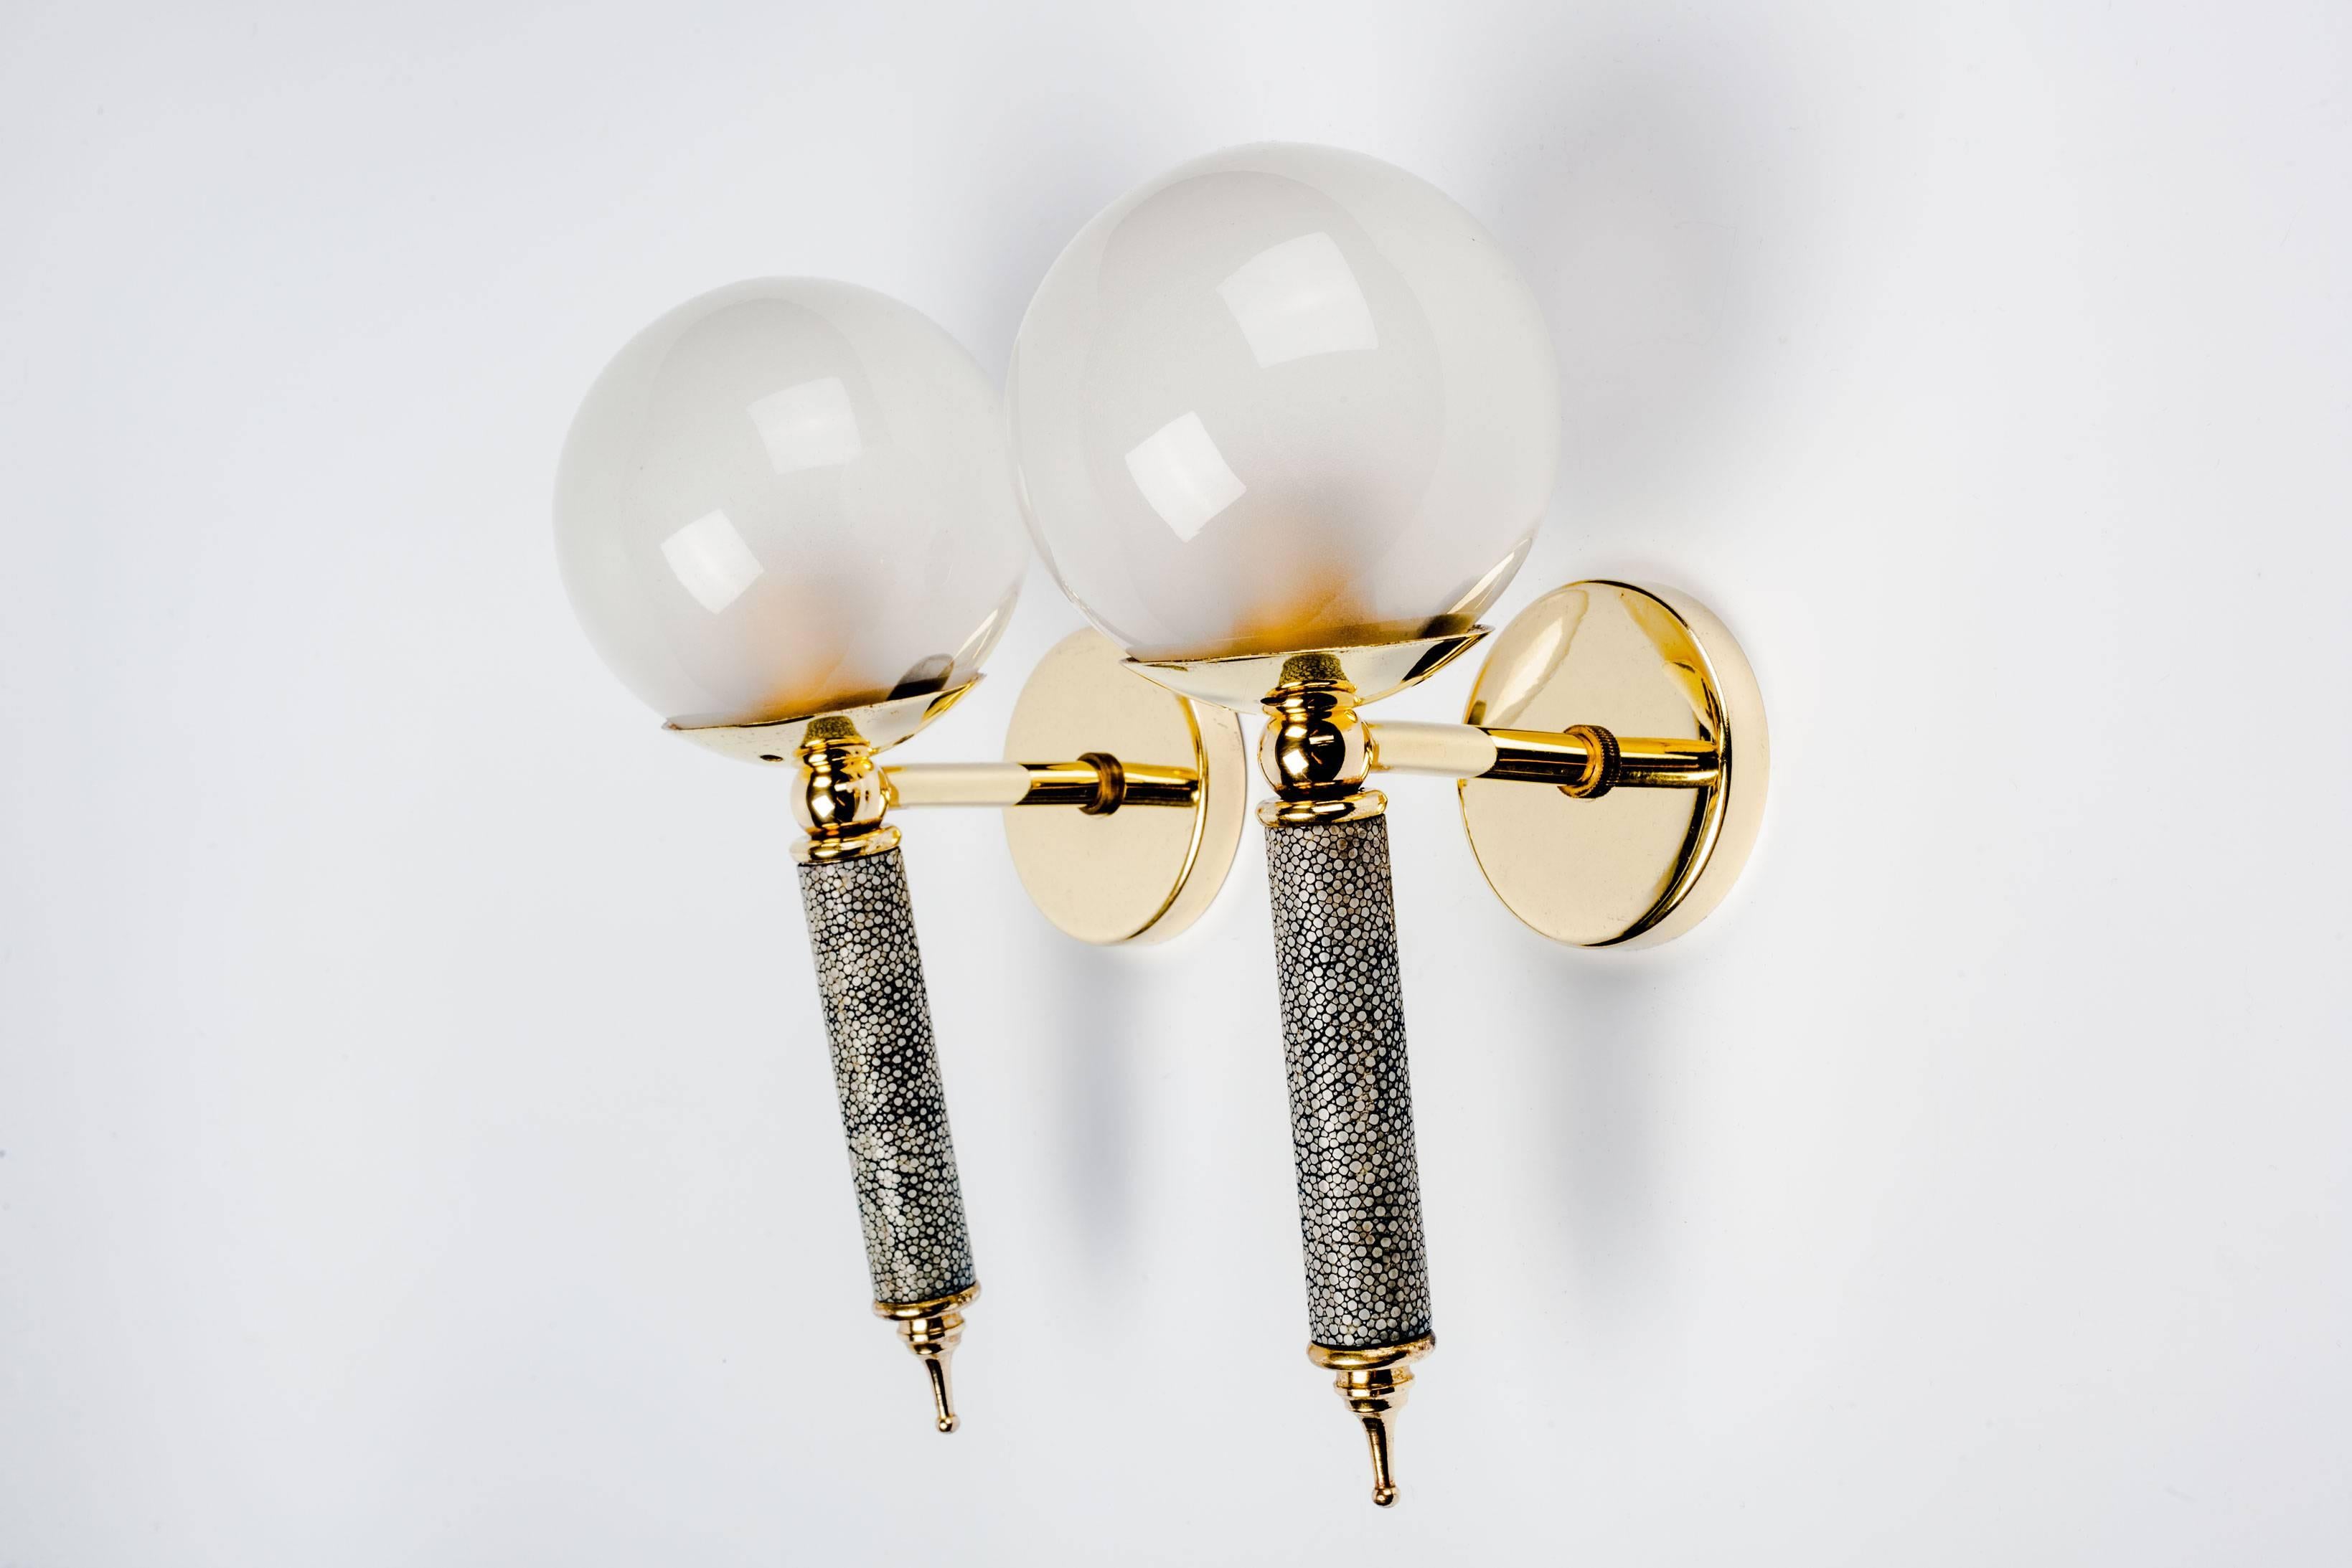 Midcentury French brass sconces with round, opaline glass diffusers. Interior frosting on the glass orbs cast a glowing light. Stems are covered in shagreen. 

Shagreen, wrapped around the stems of these sconces, is leather-like to the touch. Called